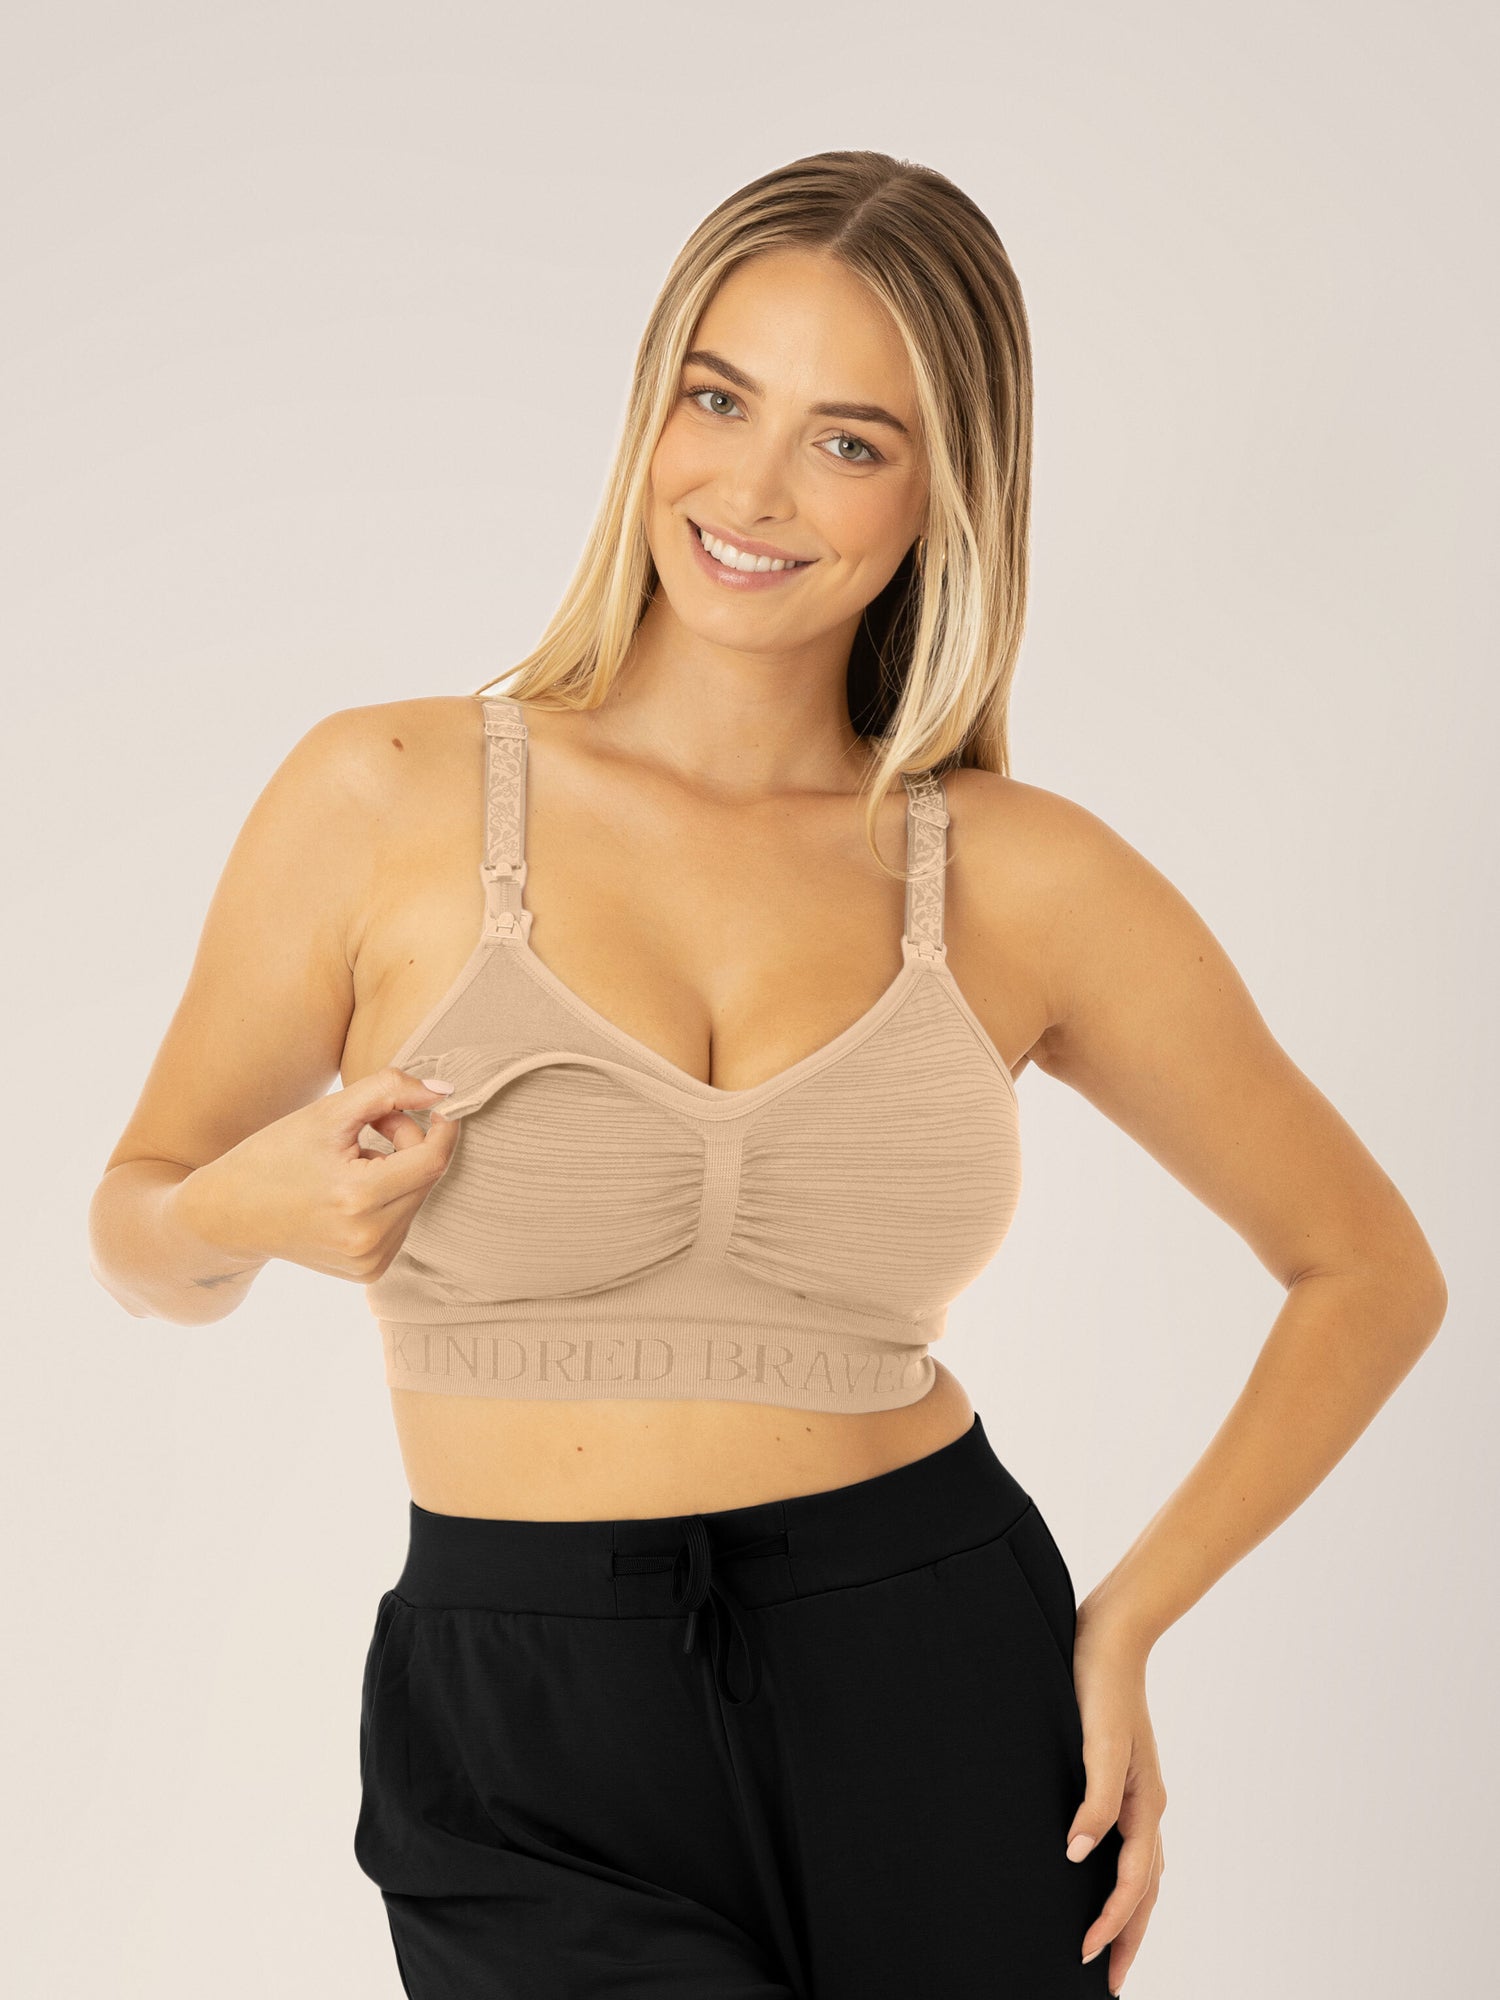 Innovative Hands Free Pumping and Nursing Bras & Accessories